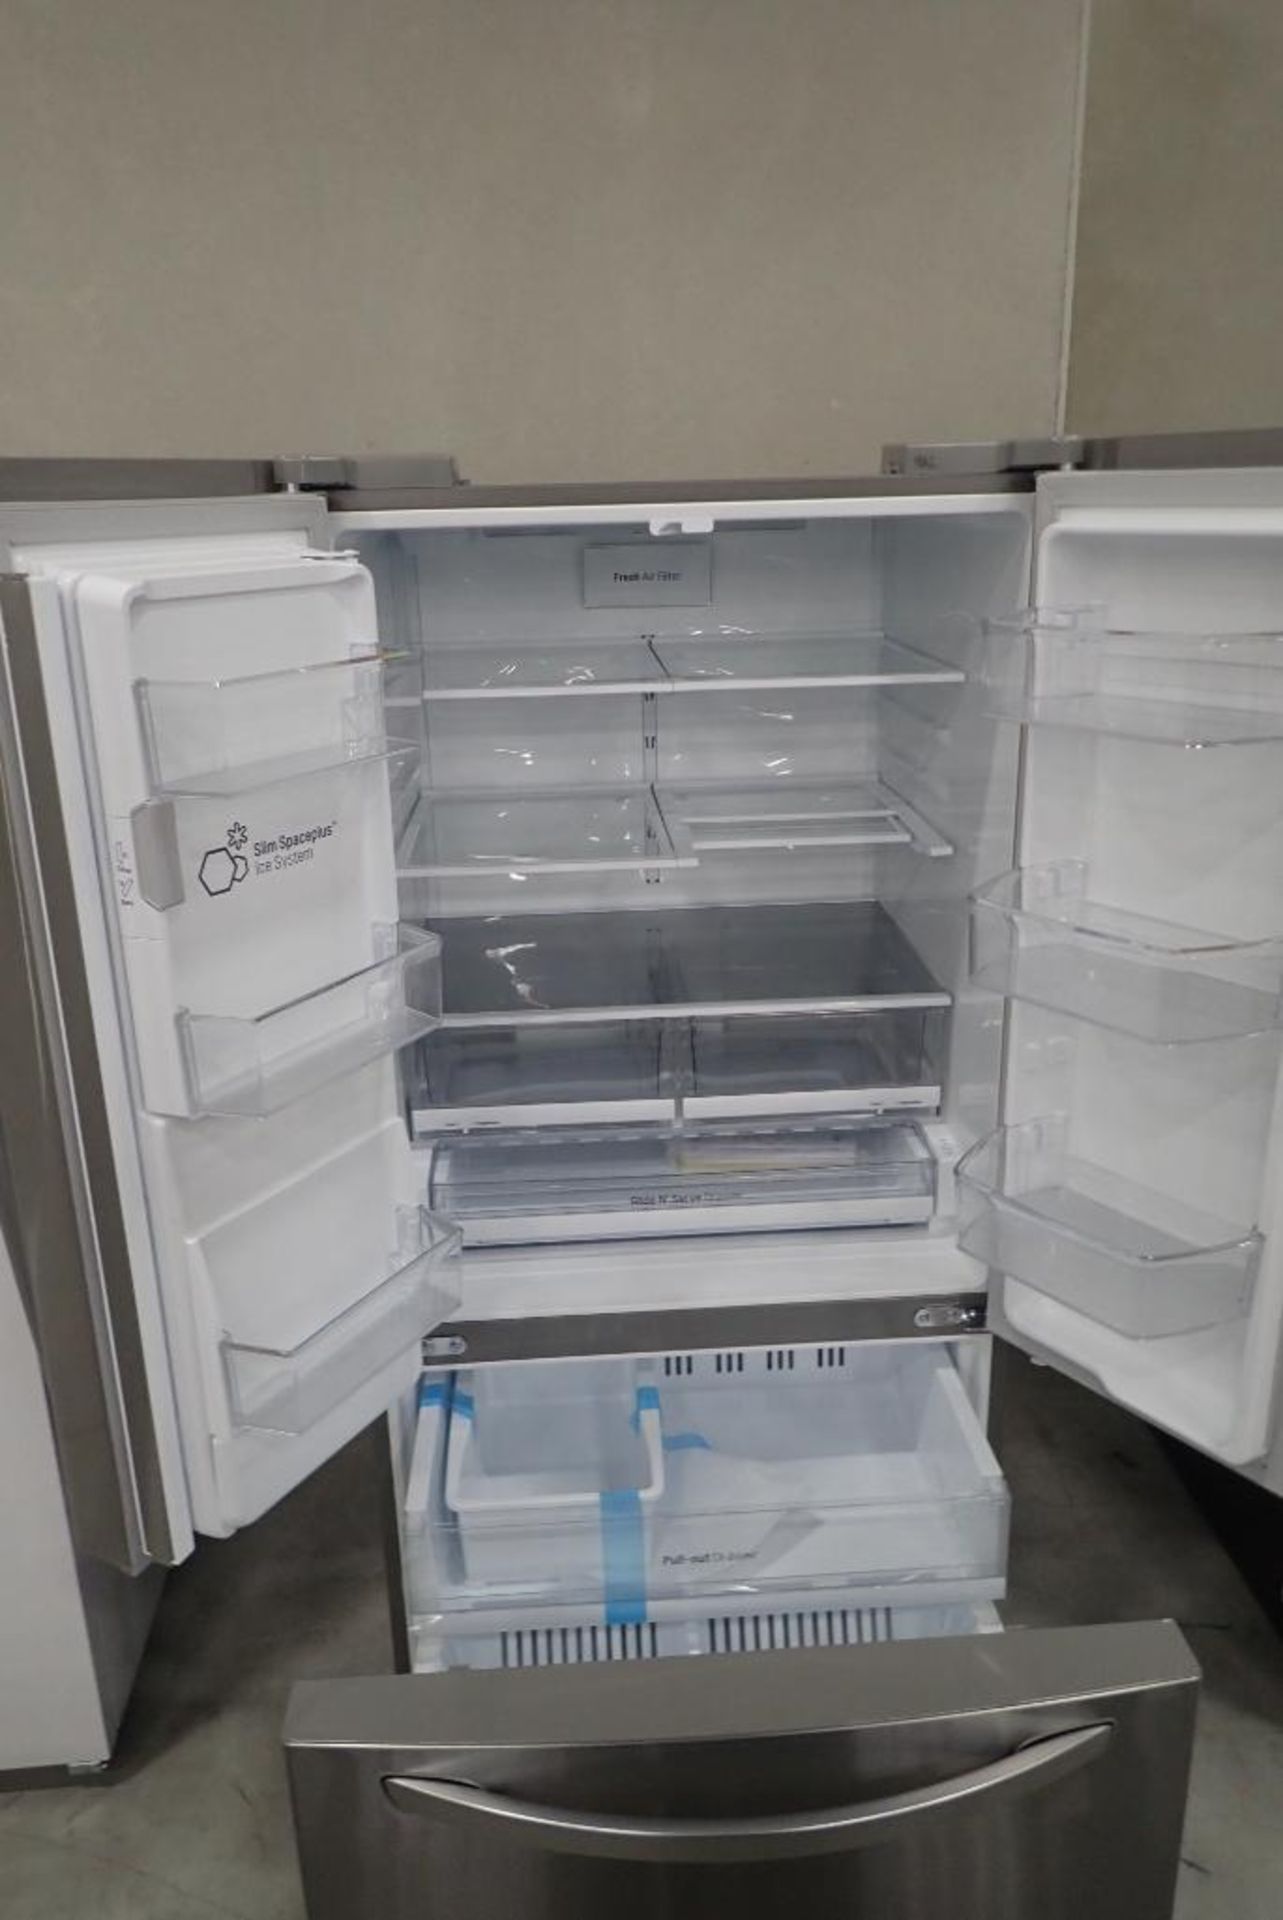 LG Inverter Linear LRFX825038 Stainless Steel French Door Refrigerator. - Image 3 of 5